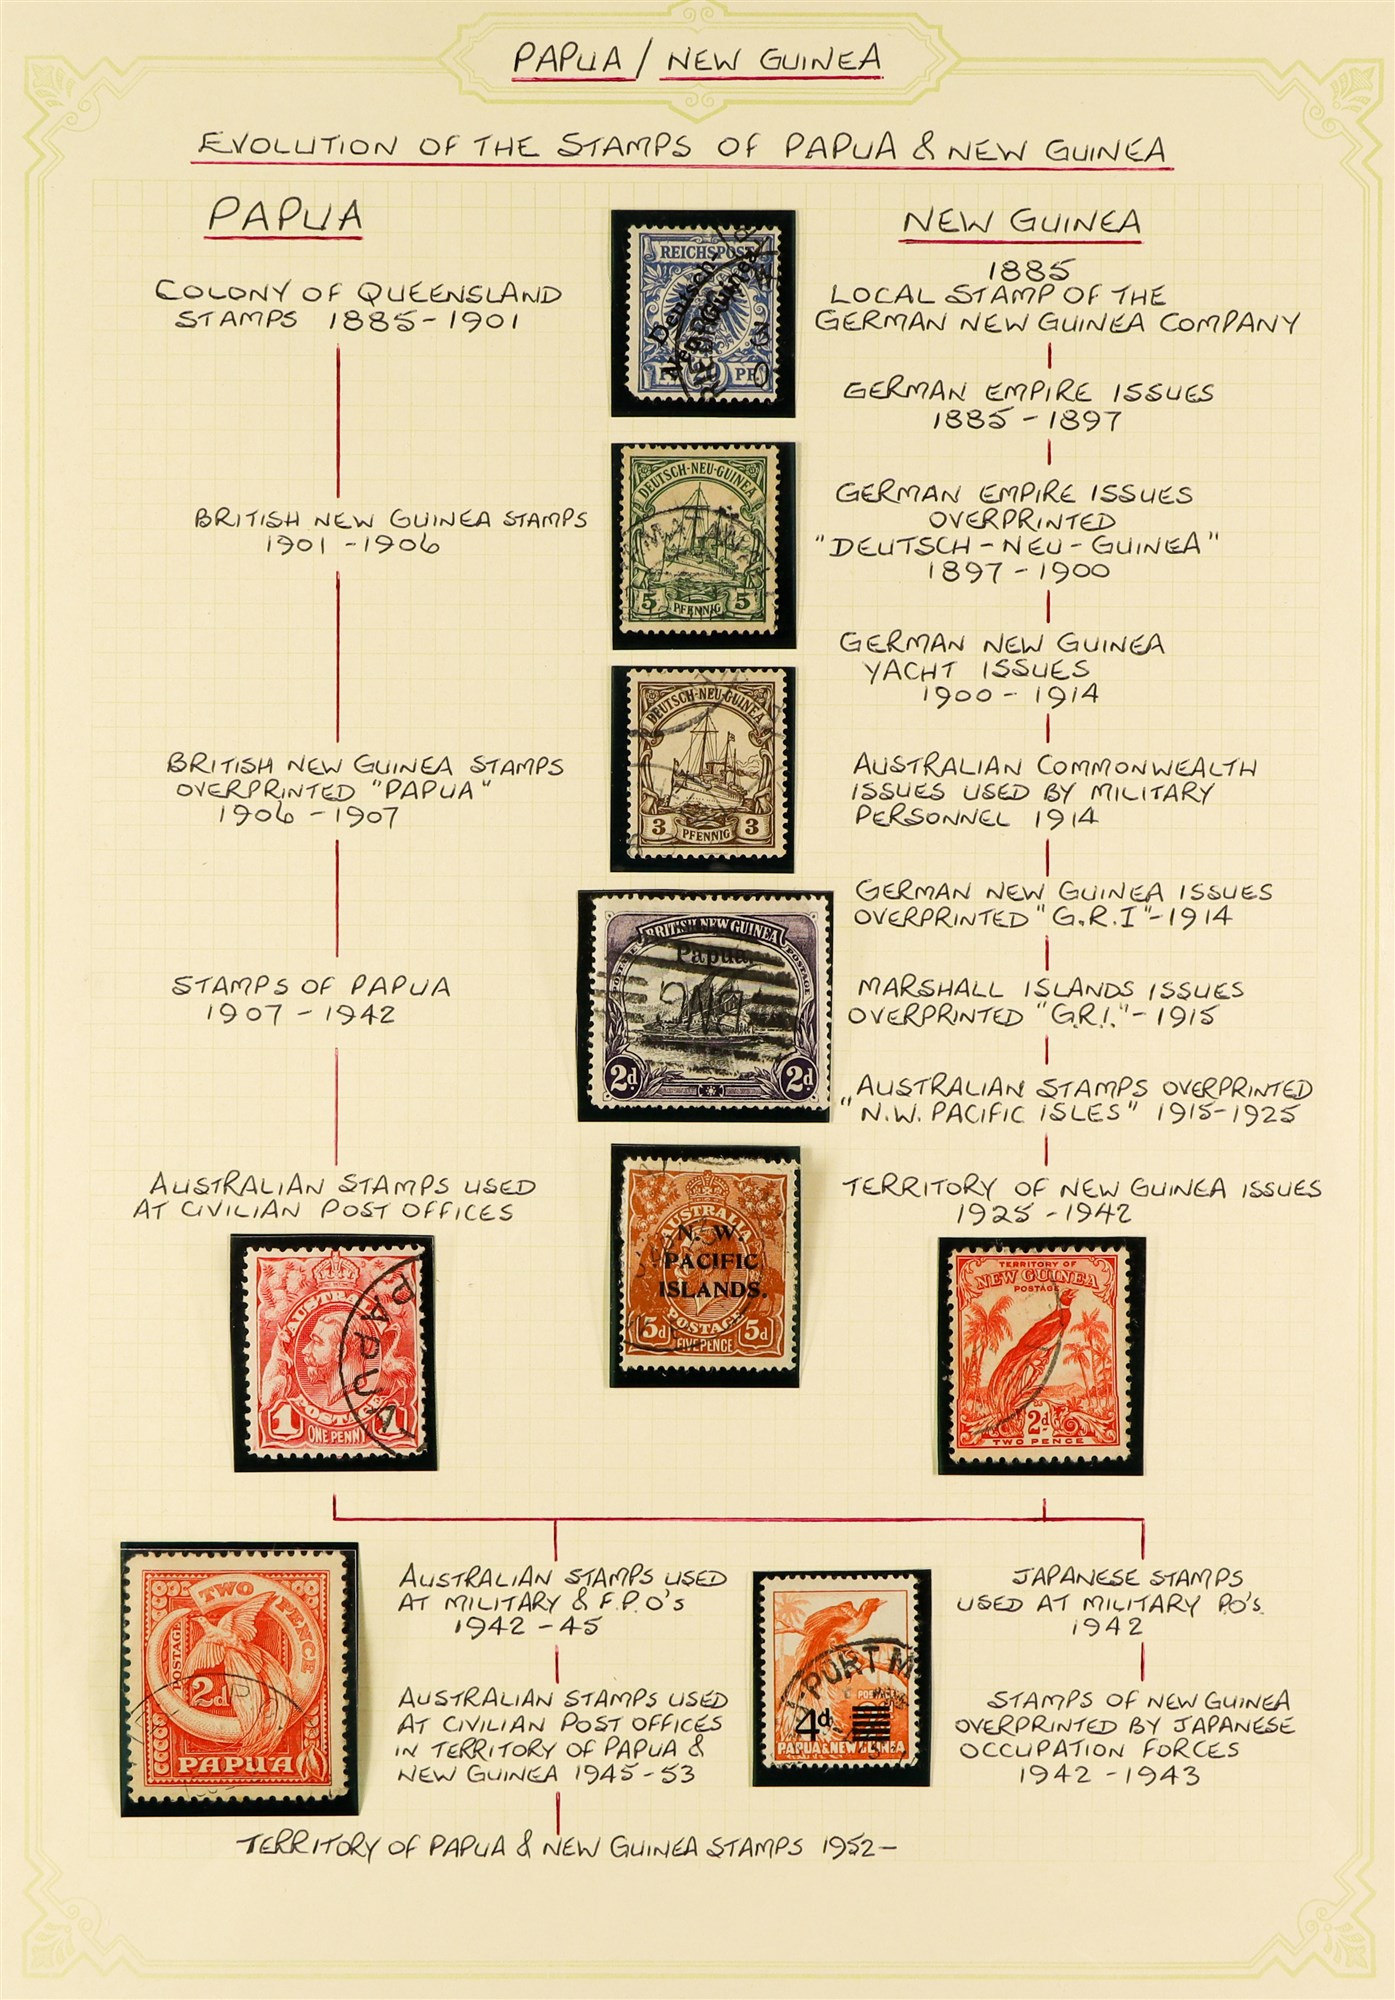 NEW GUINEA 1915 - 1939 SPECIALISED ASSORTMENT of 100+ used stamps on various pages collected for - Image 8 of 10